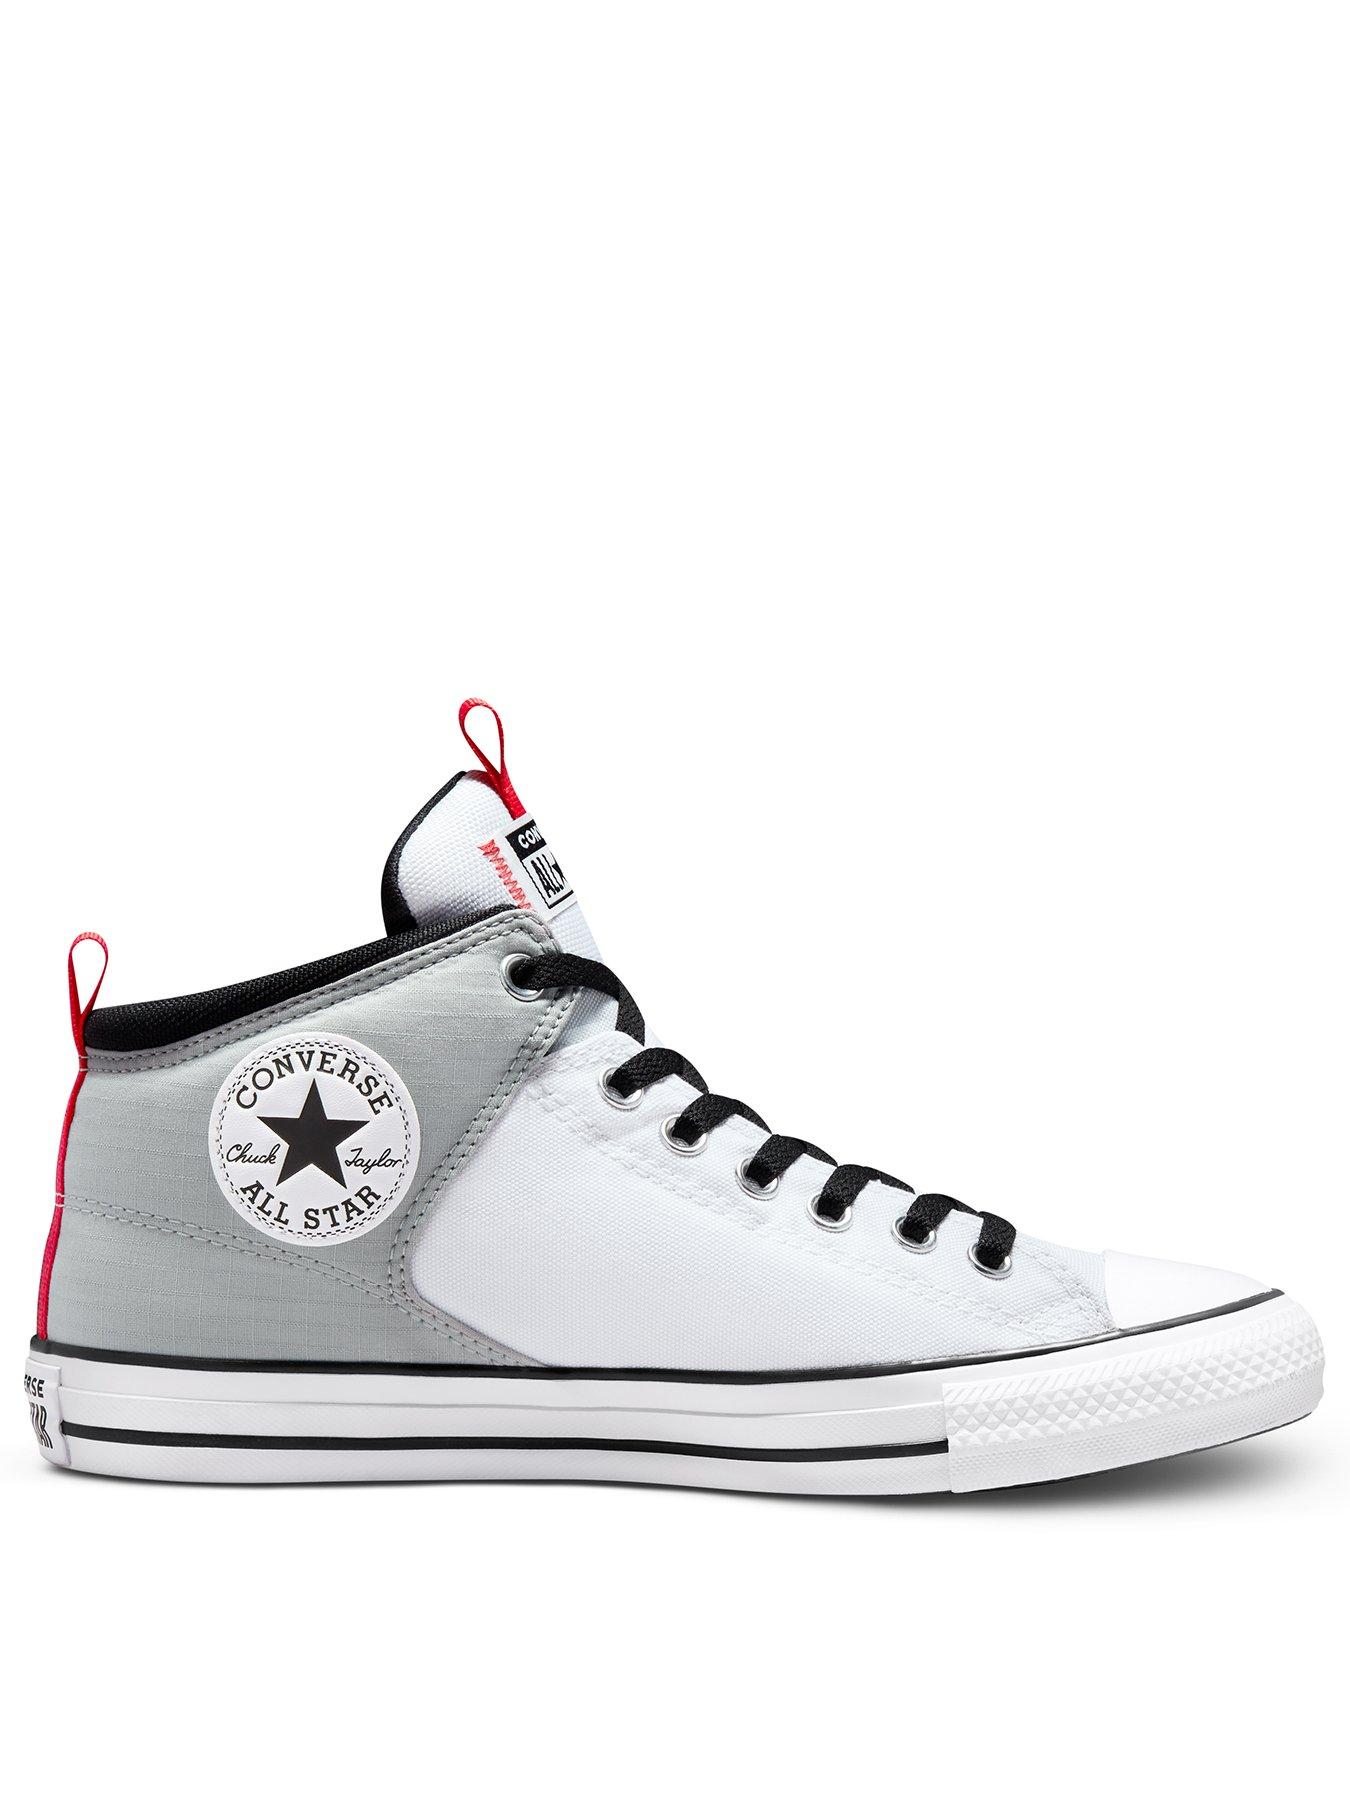 converse chuck taylor all star street core canvas mid